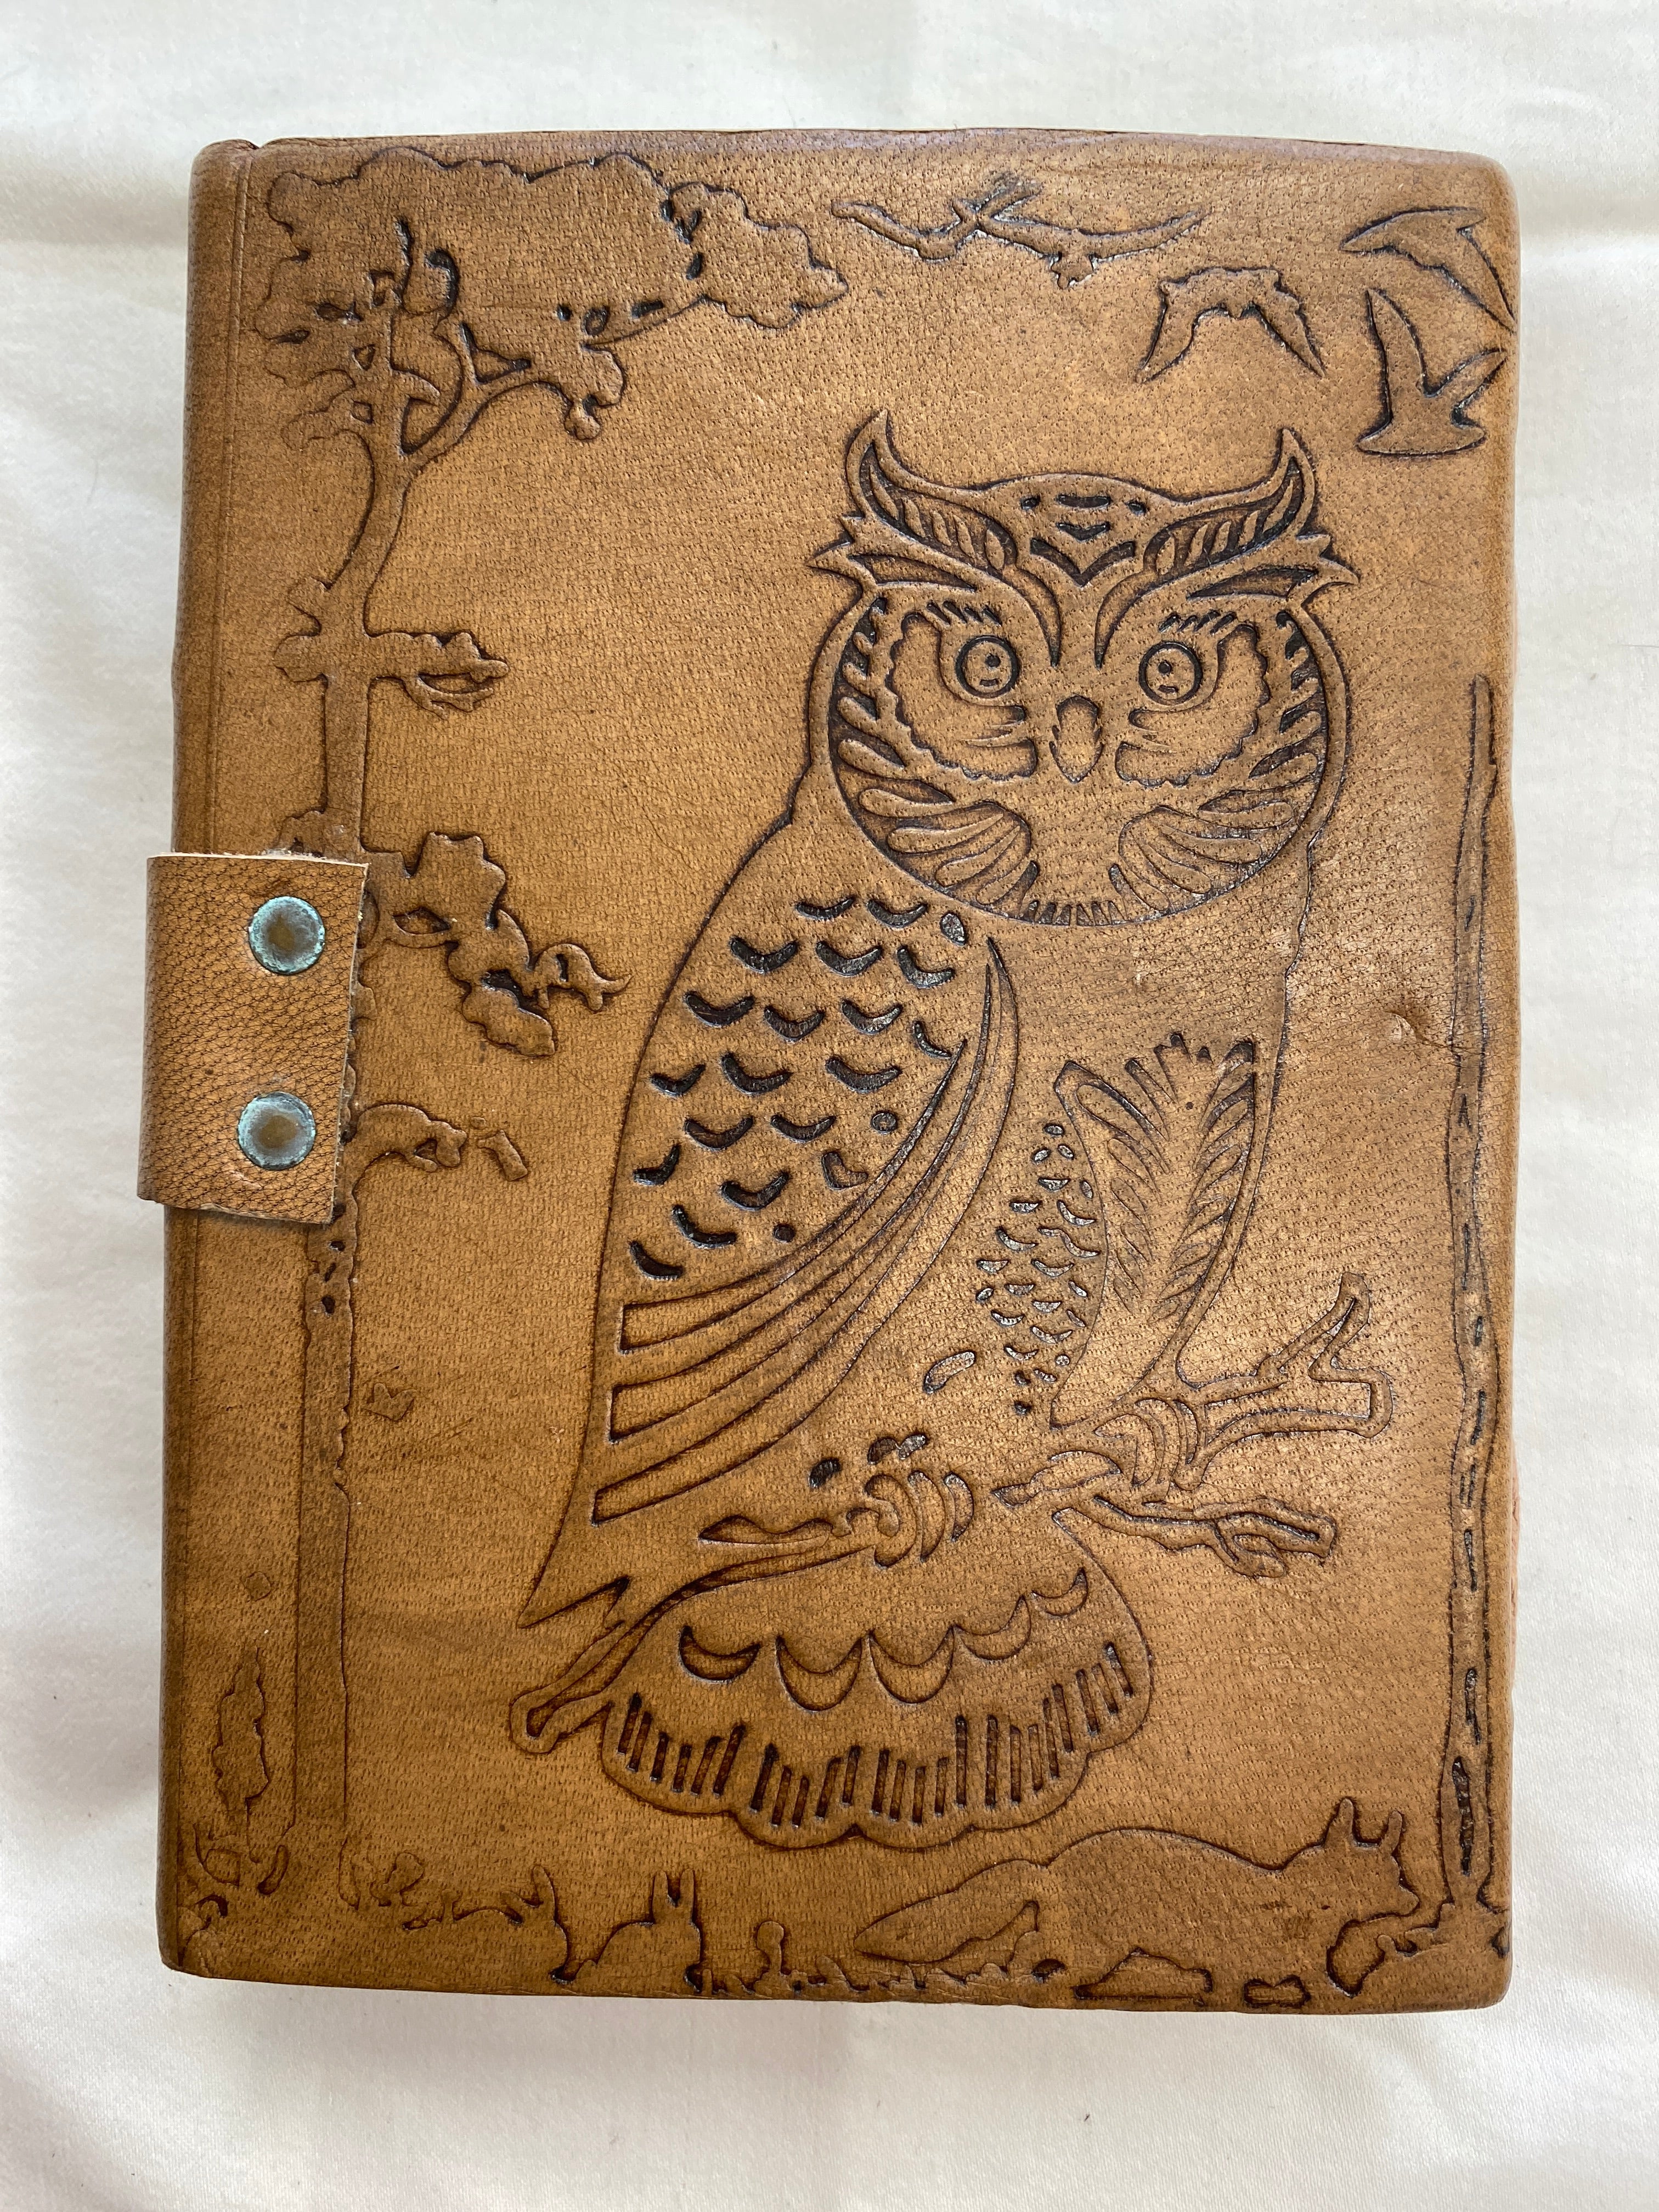 Owl in Jungle Leather Journal